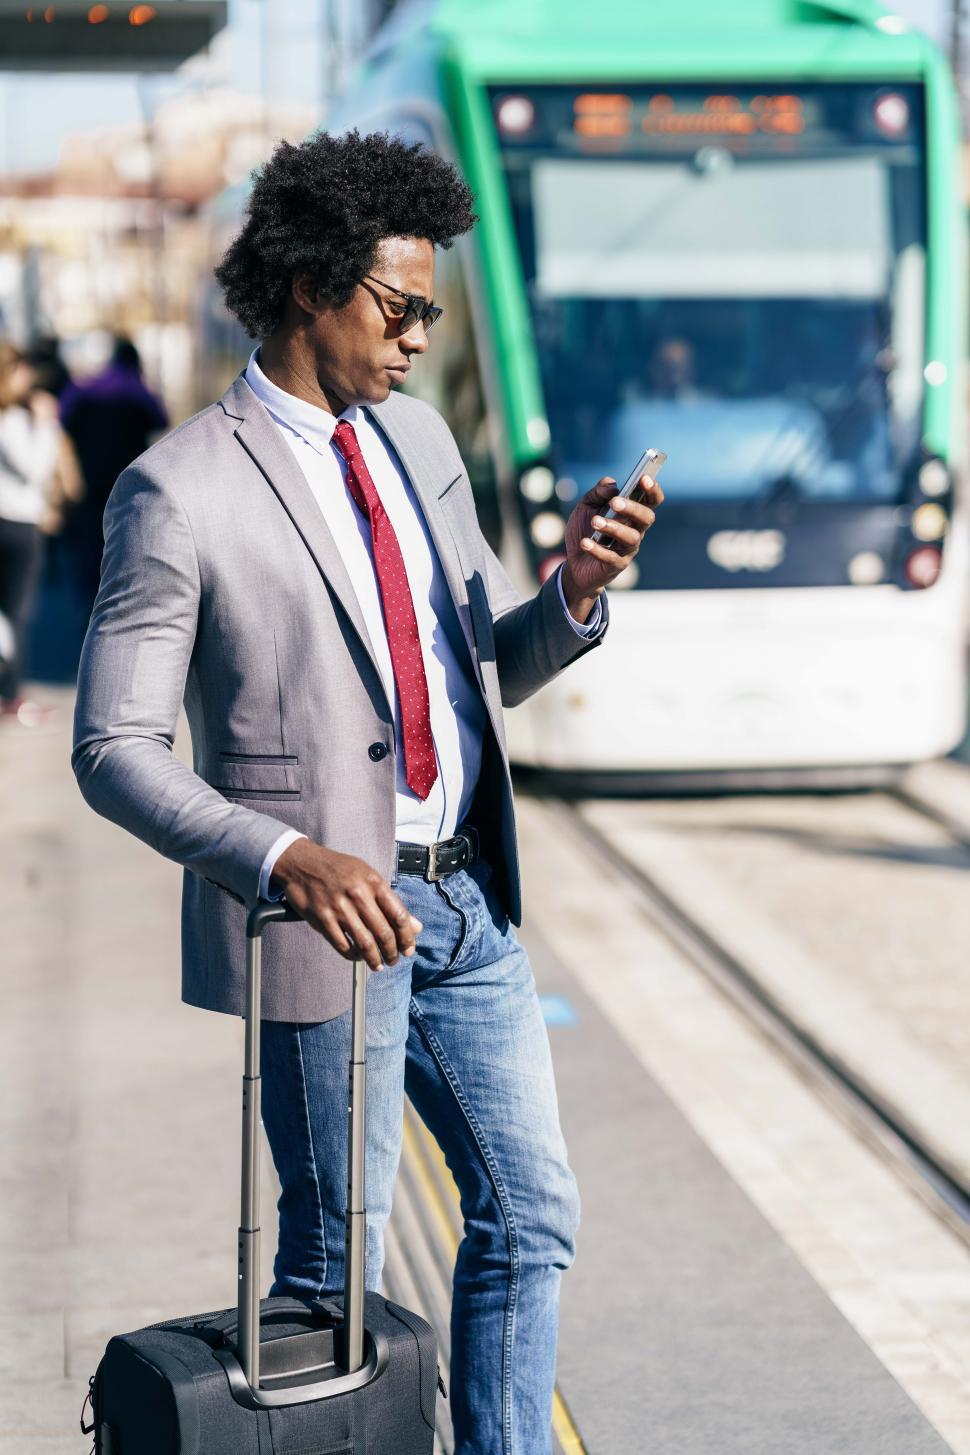 Free Image of Black Businessman waiting for the next train 